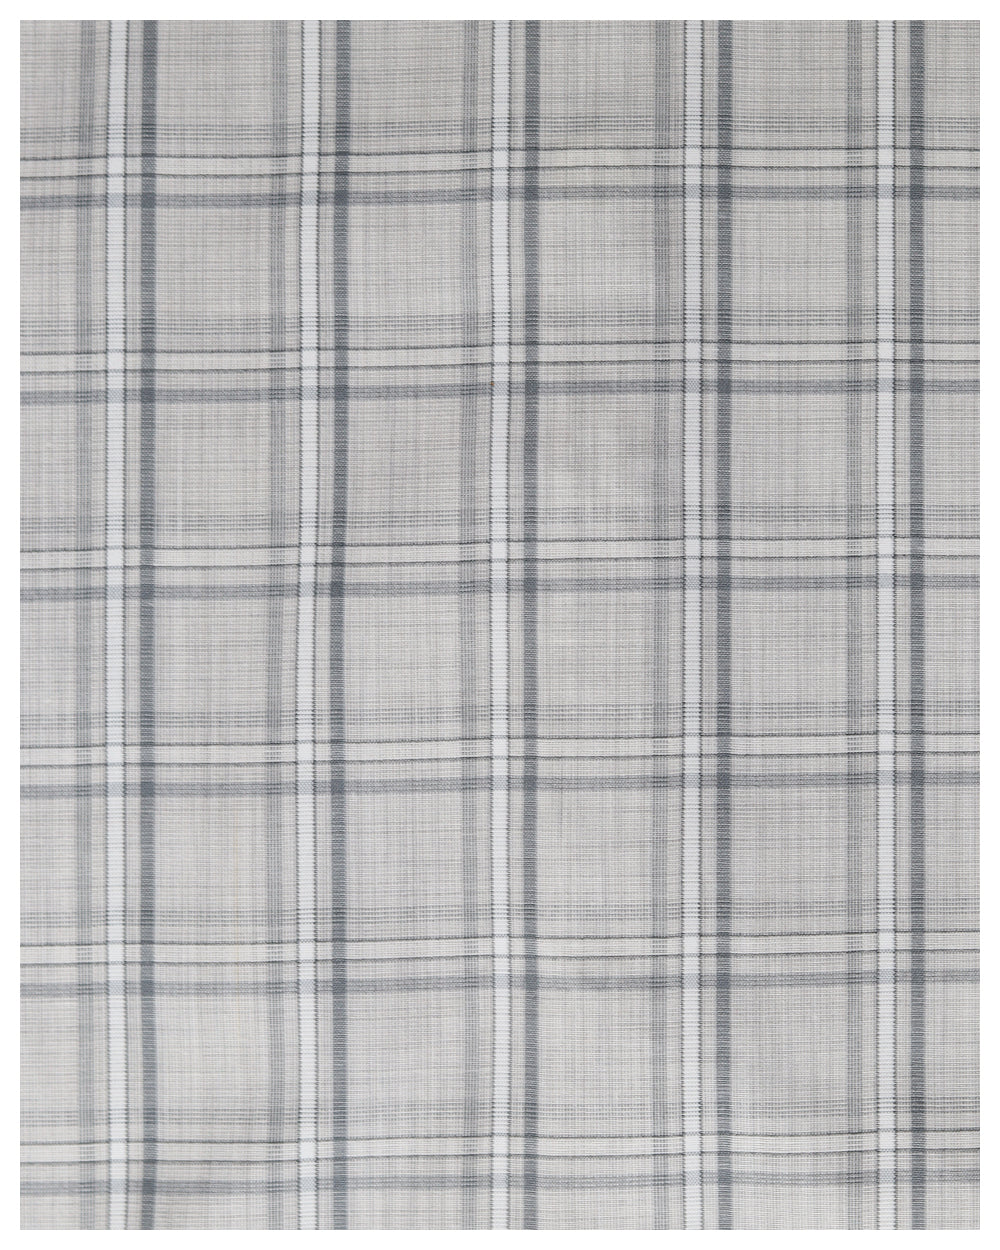 Accoy Checked Ivory Formal Shirt.